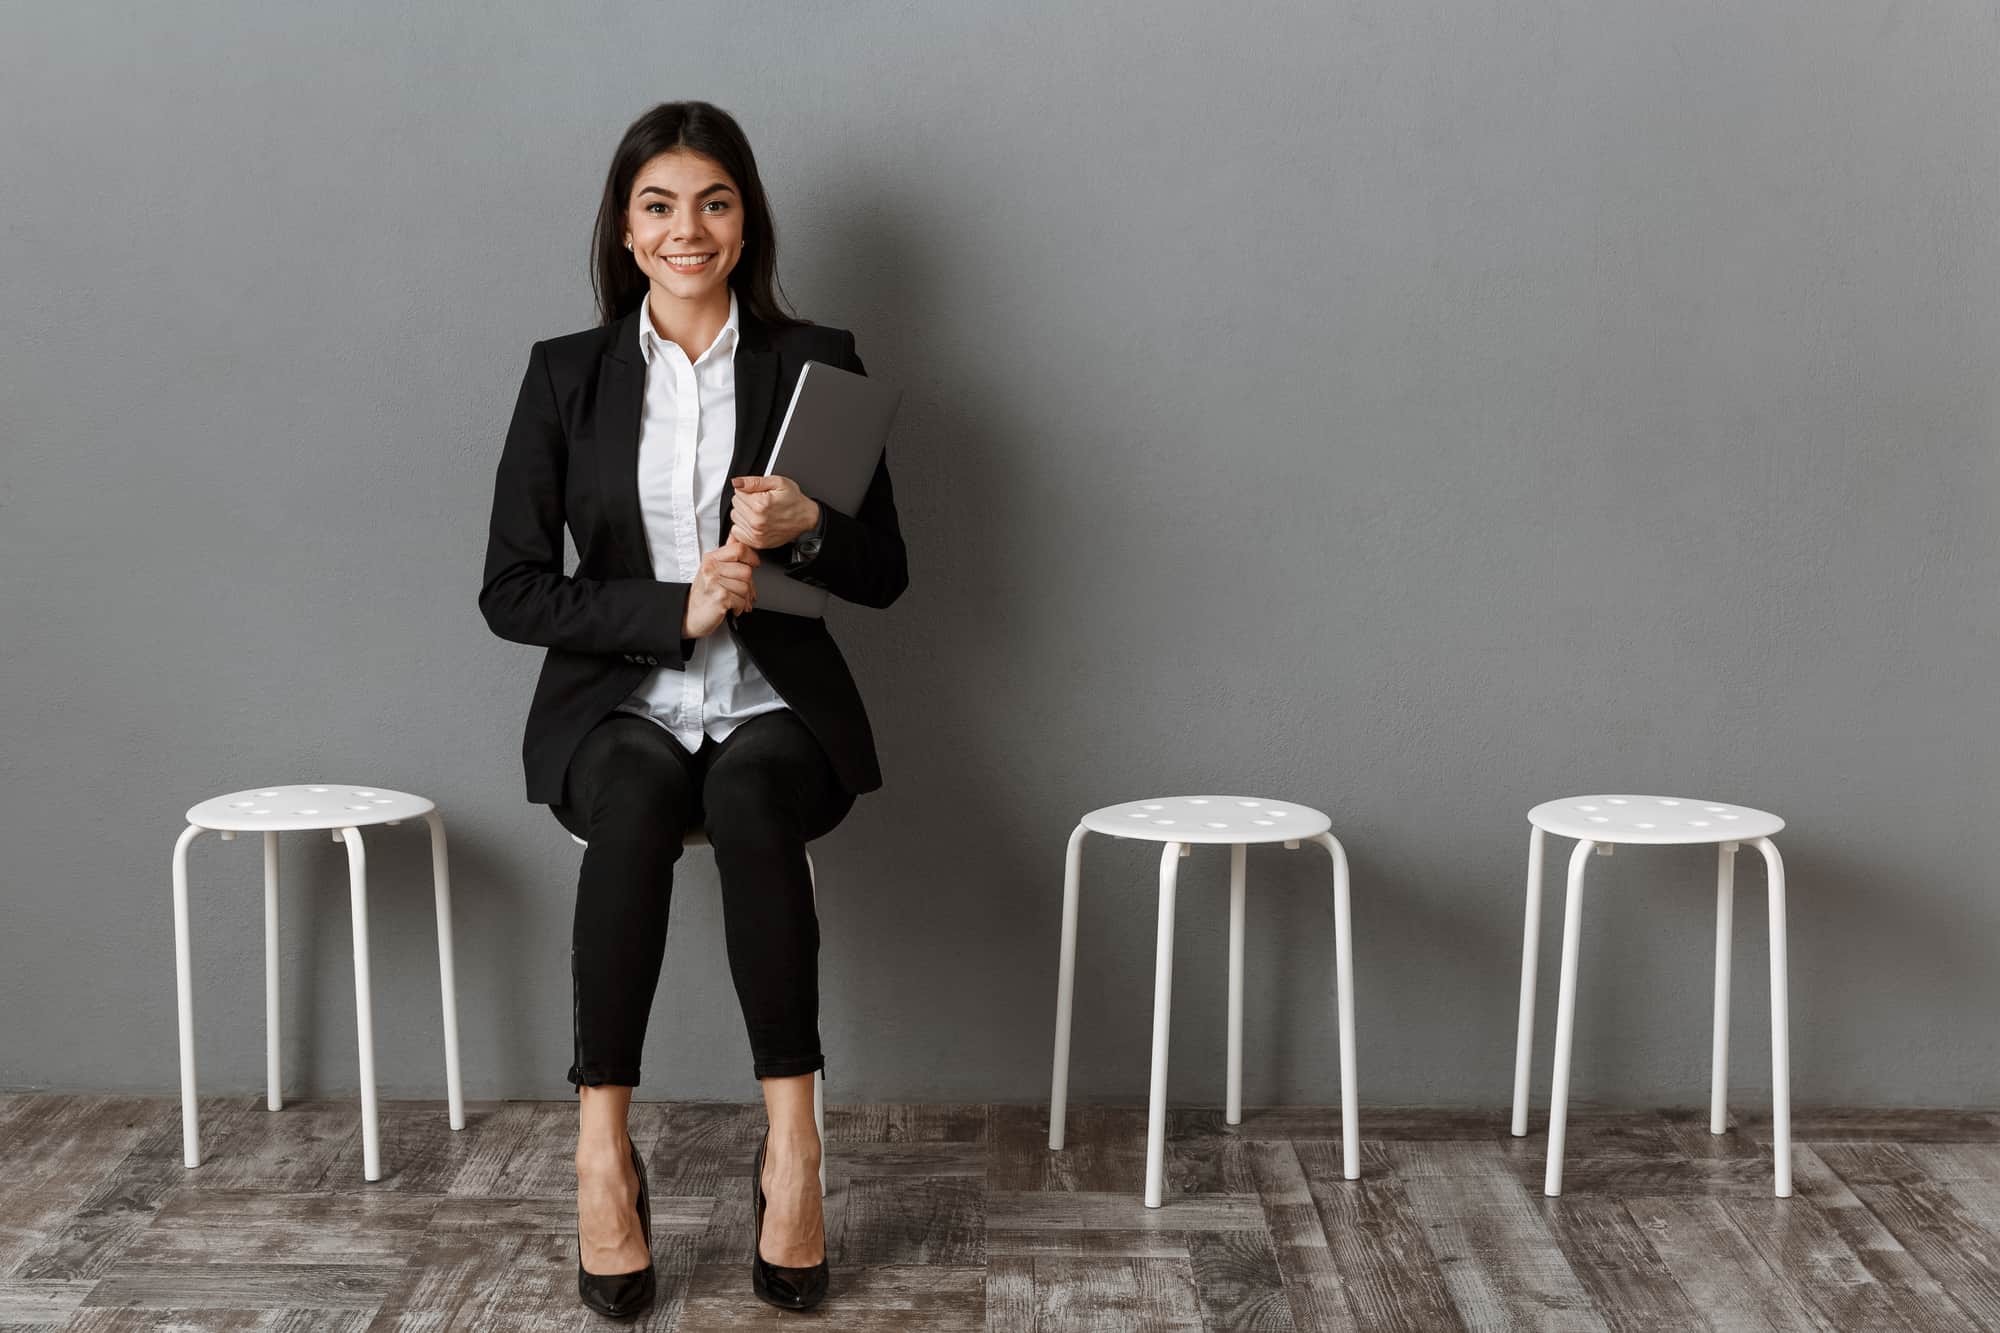 5 Quick And Easy Ways To Impress Your Interviewer! 